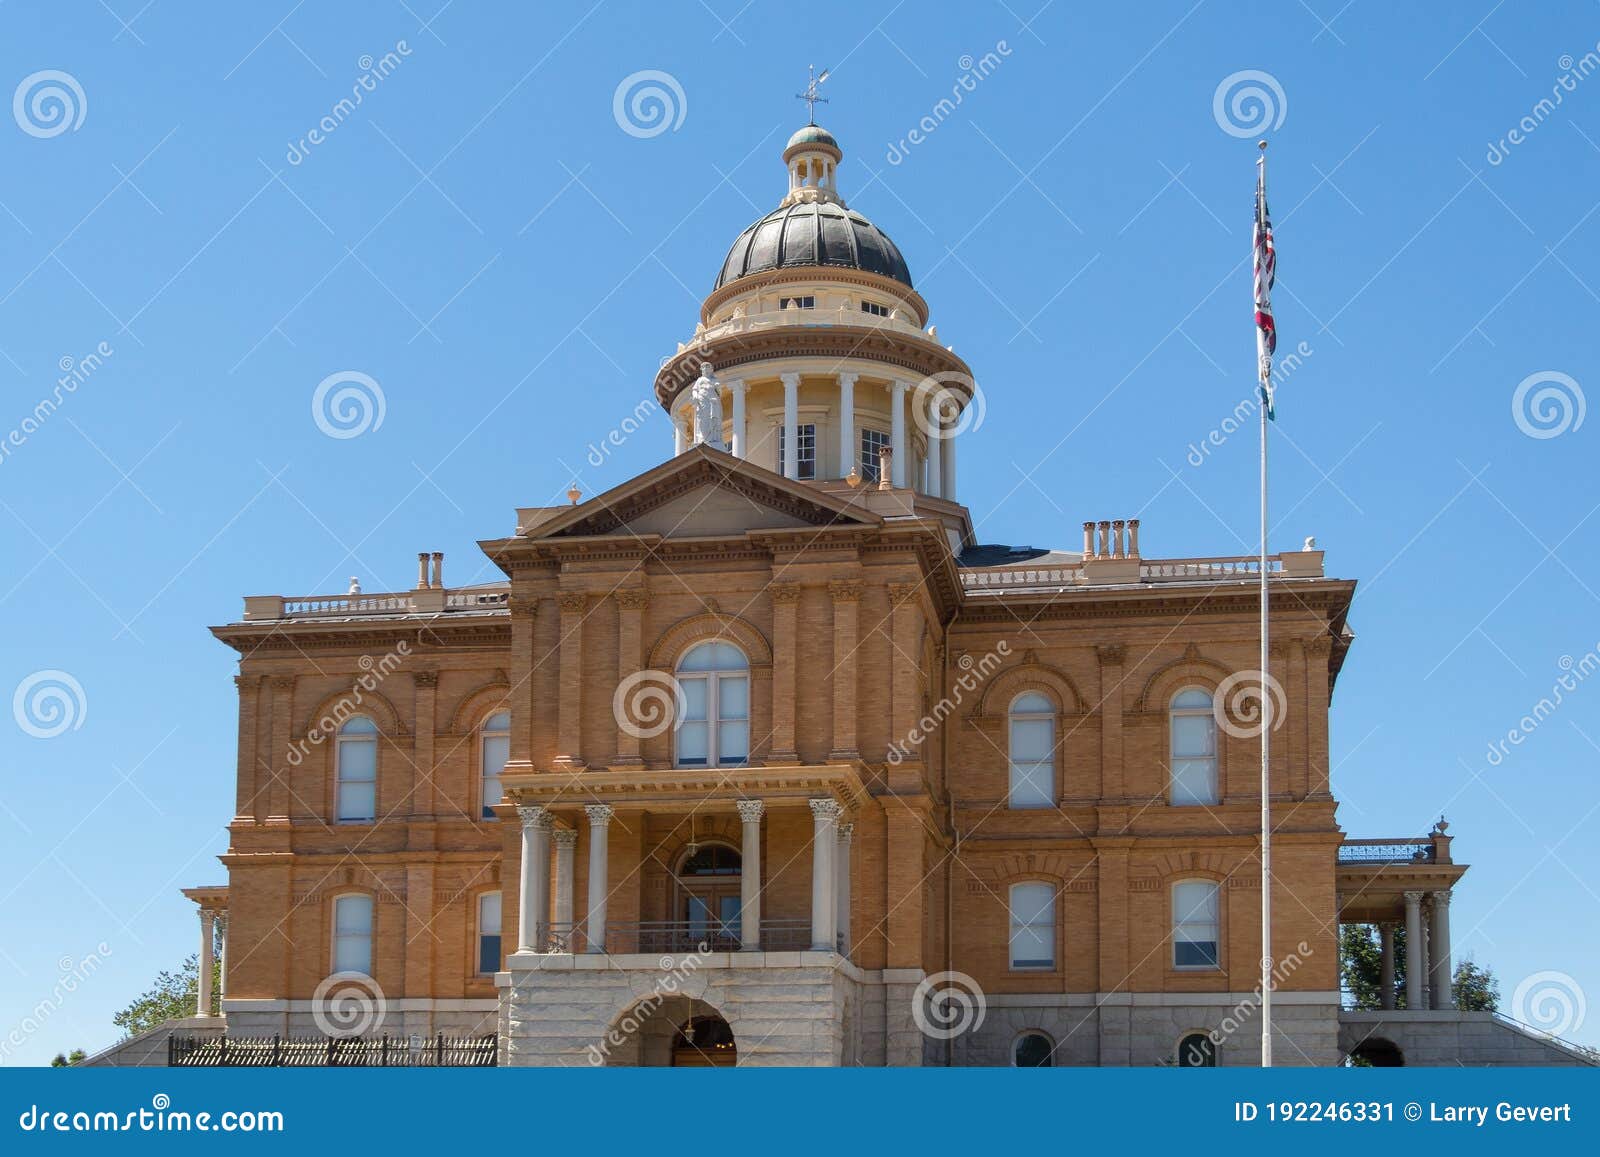 placer county, california courthouse